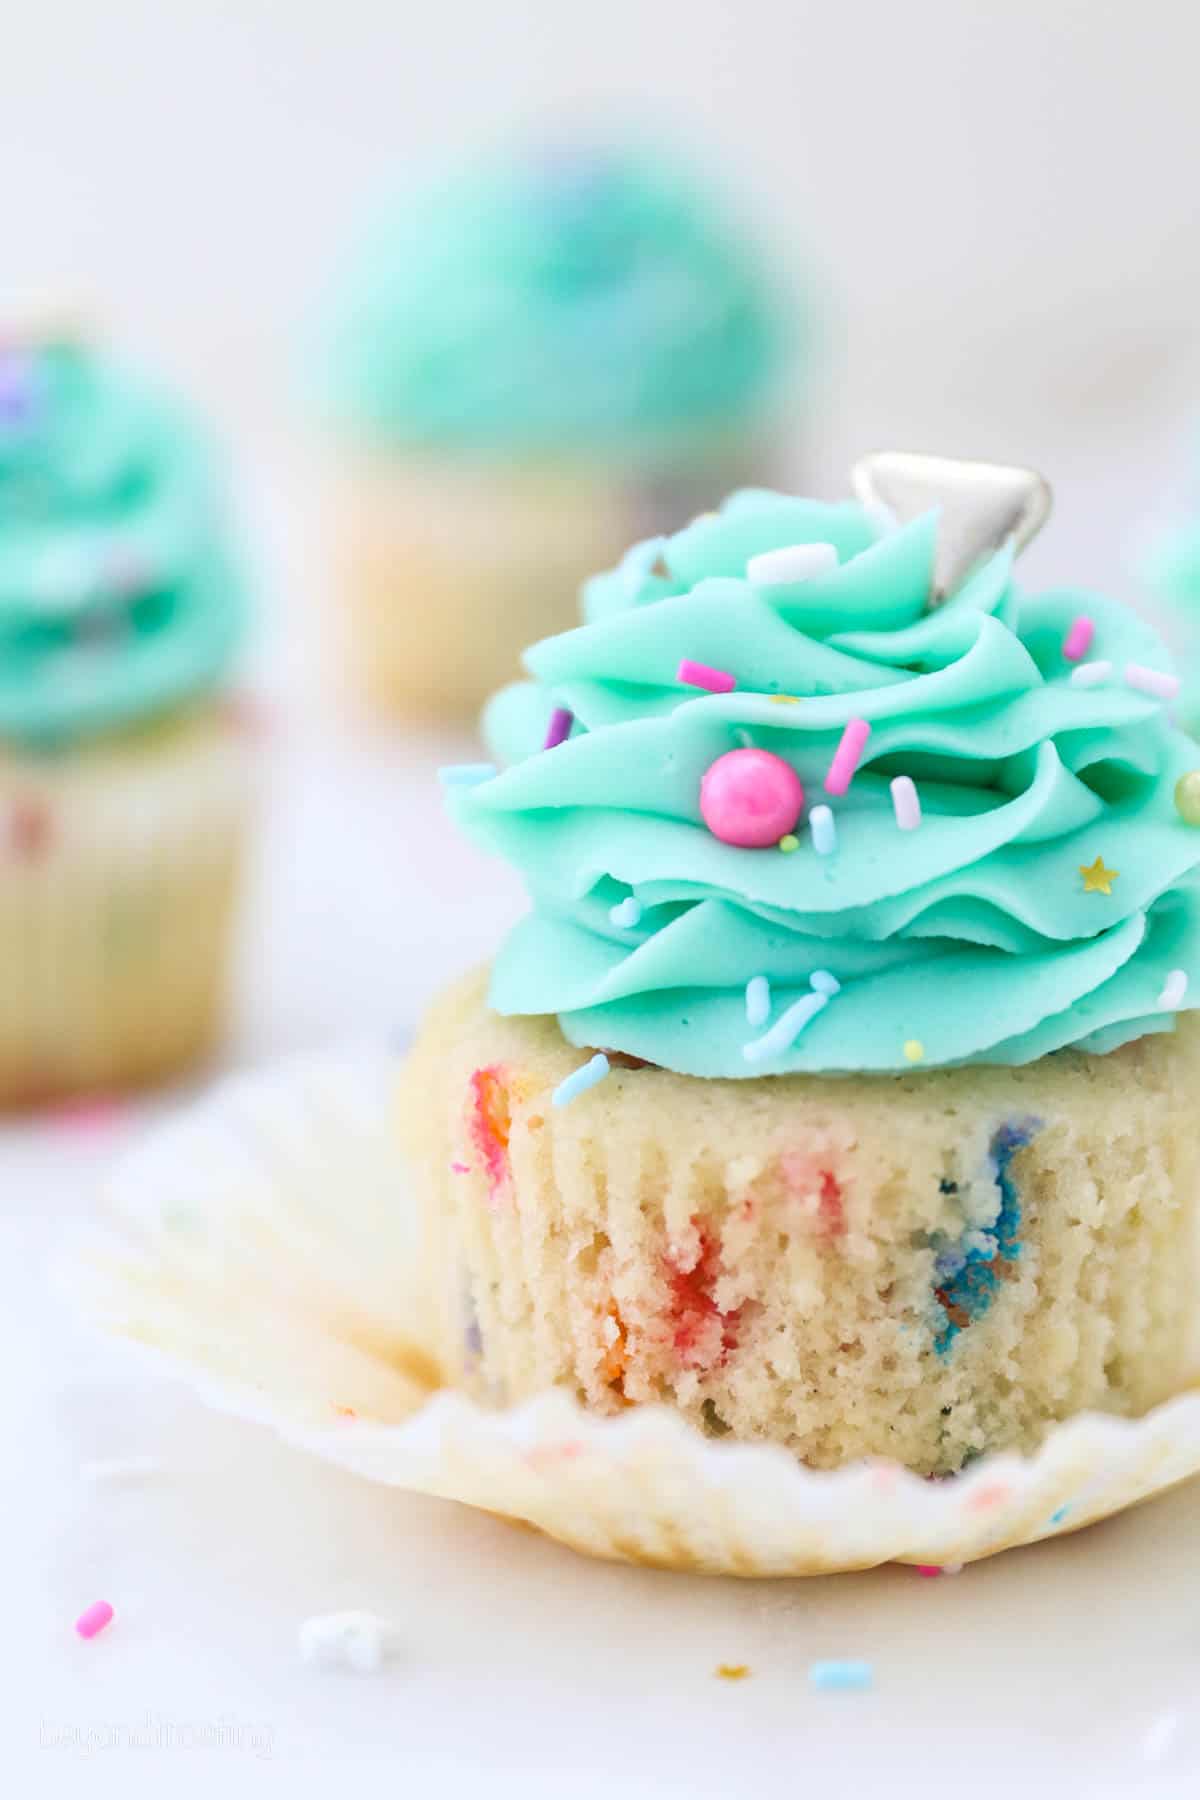 Close up of a partially unwrapped funfetti cupcake frosted with a teal buttercream swirl and sprinkles, with more cupcakes in the background.